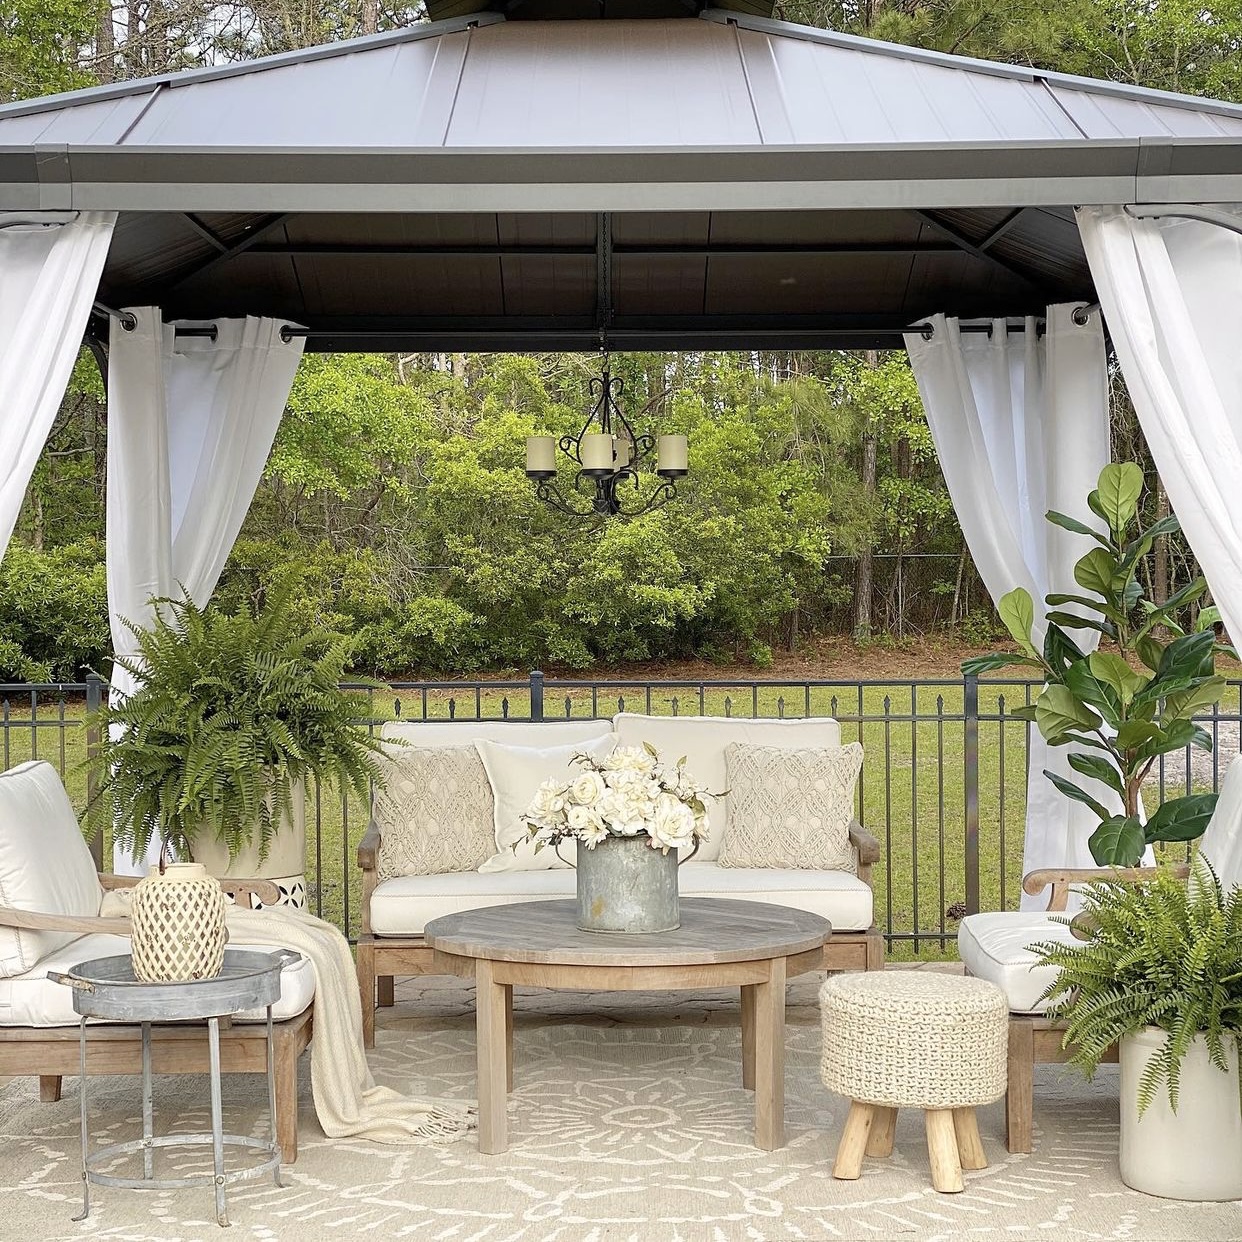 Backyard gazebo with sitting area under it. A galvanized bucket holds flowers on the coffee table and a galvanized table is next to the teak chair. 